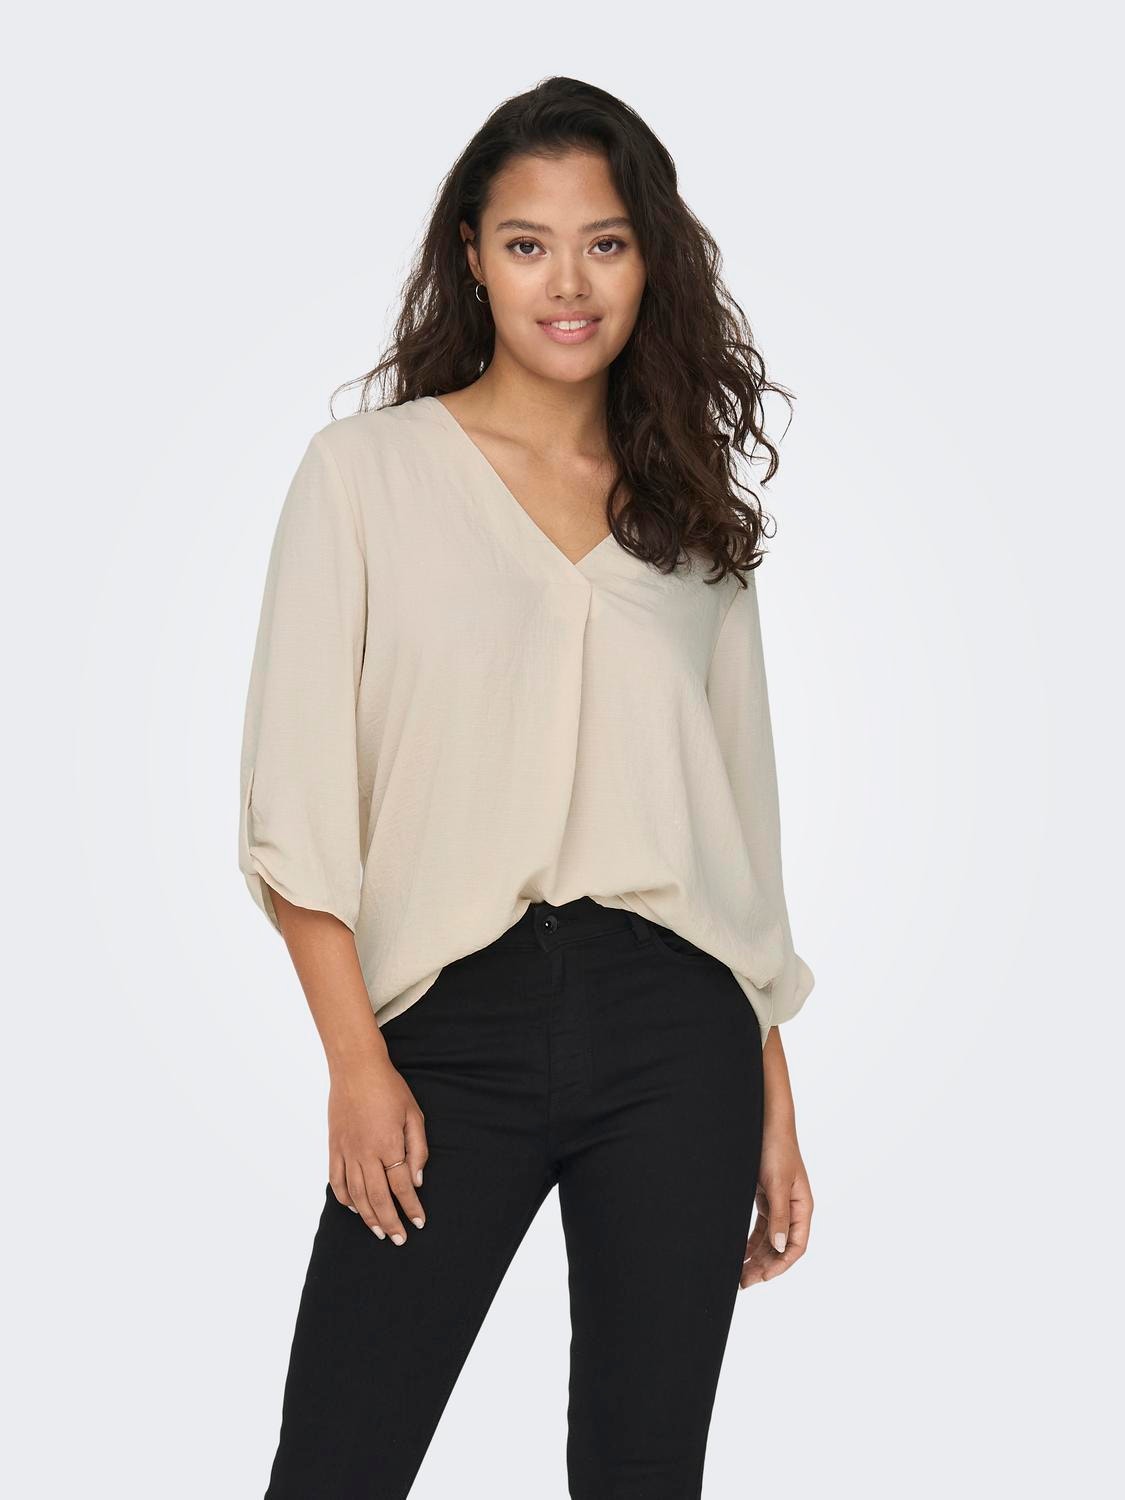 ONLY Solid colored 3/4 sleeved top -Sandshell - 15226911